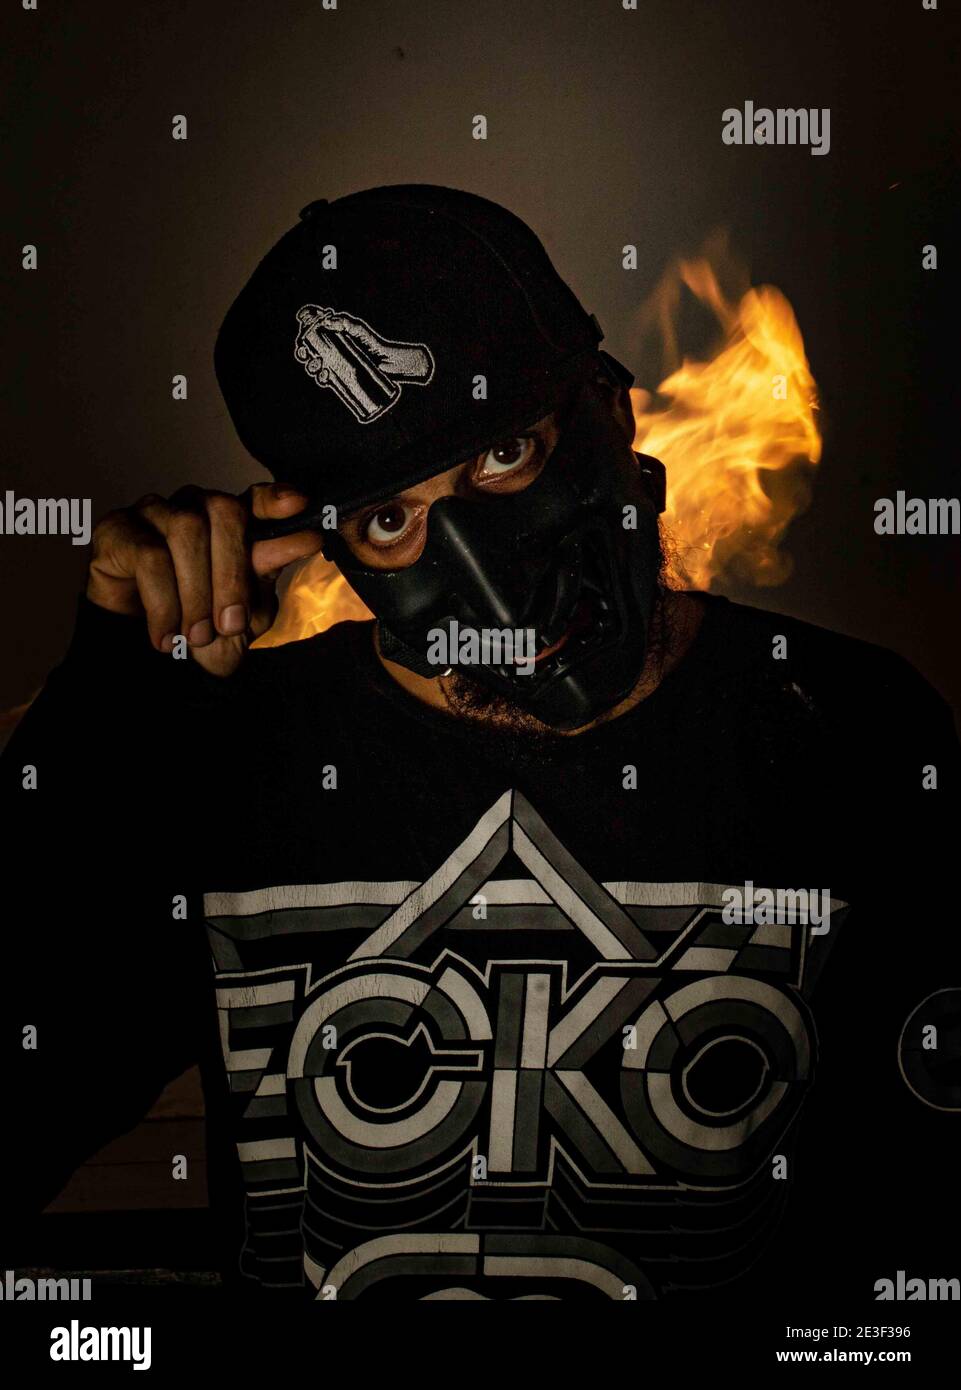 Man wearing a black mask and a cap with a graffiti spray can on it with a fire in the background Stock Photo